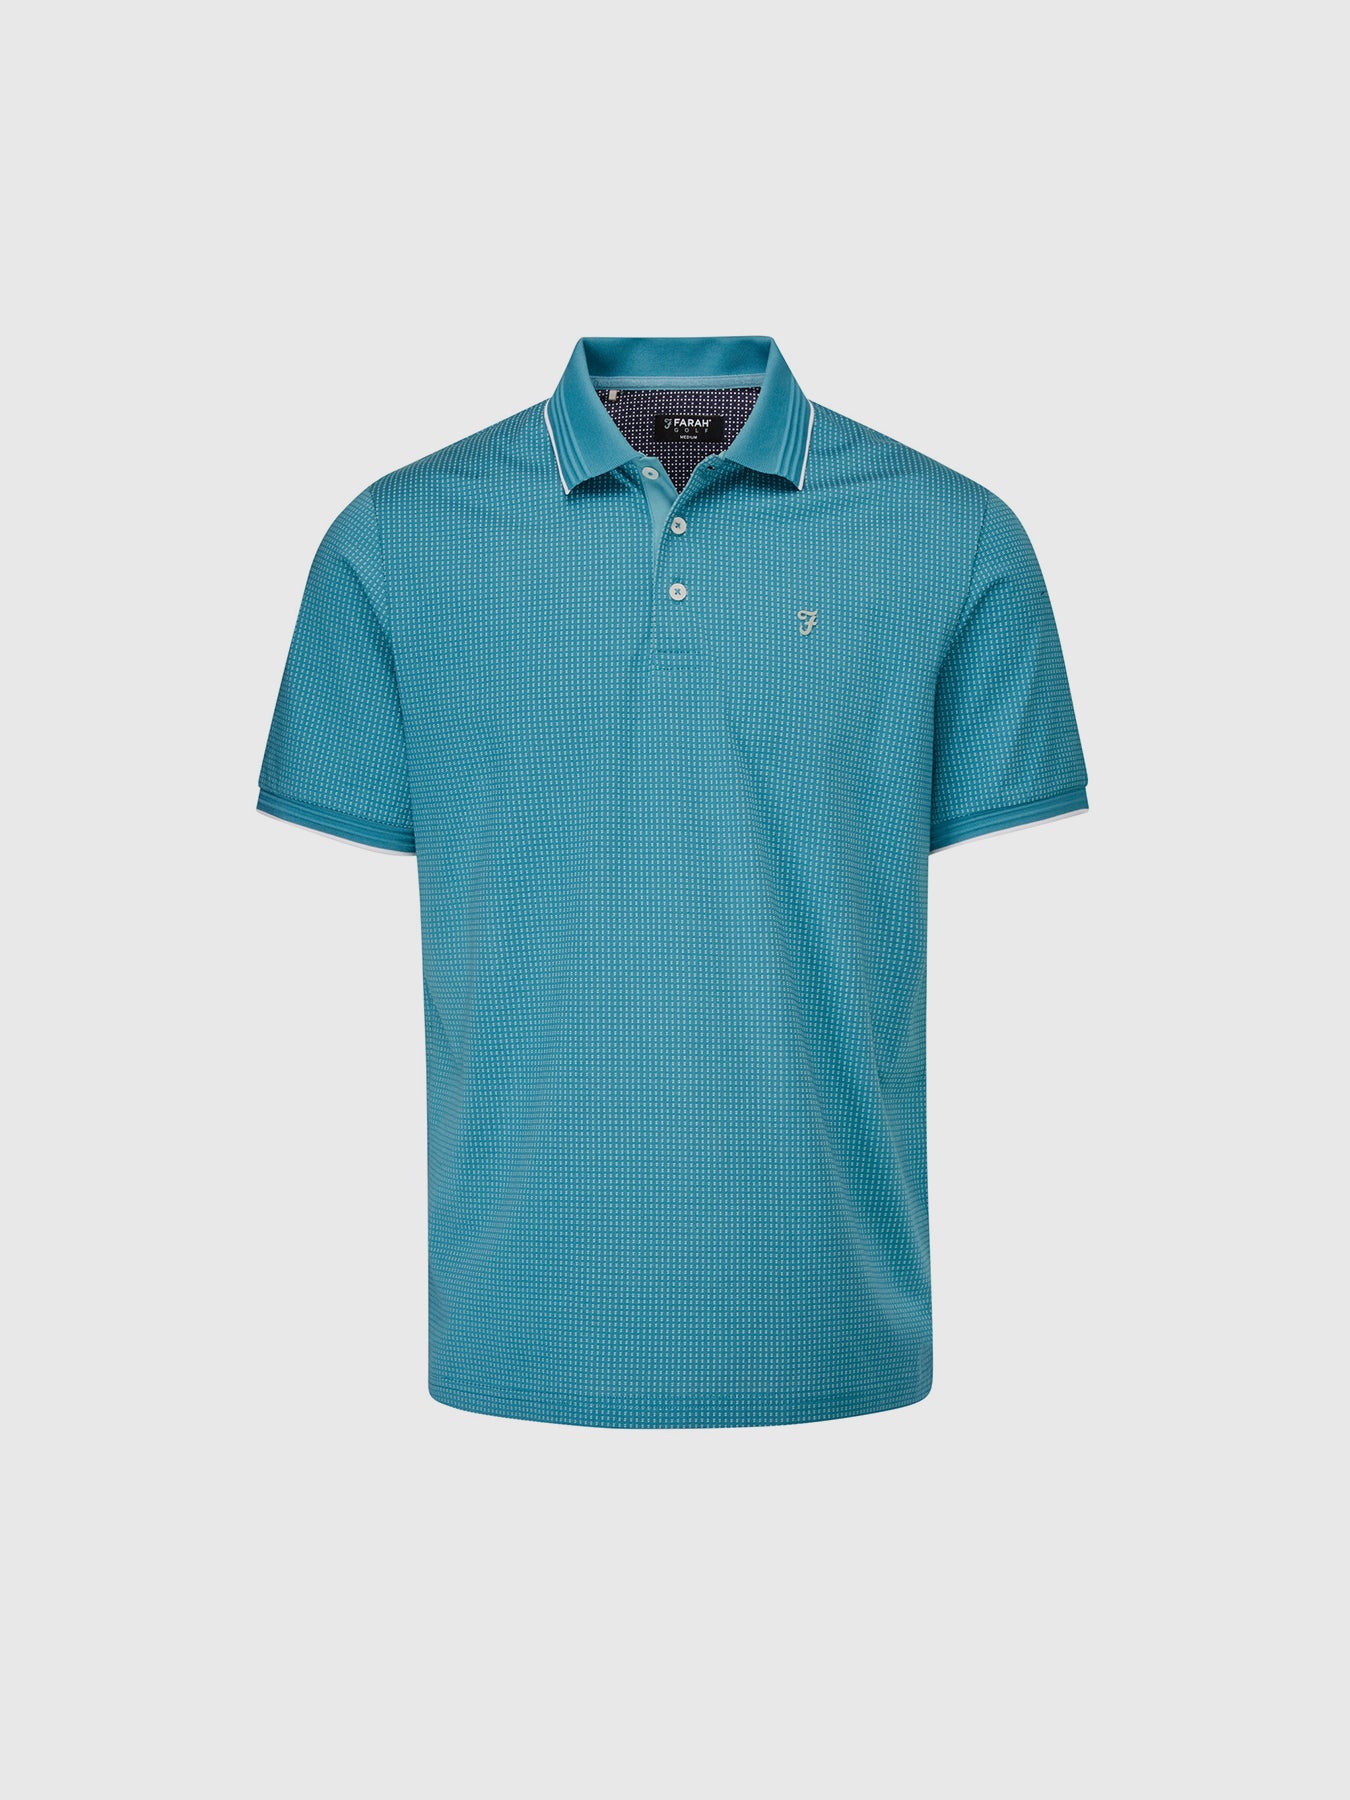 View Ferris Golf Polo Shirt In Teal Hue information